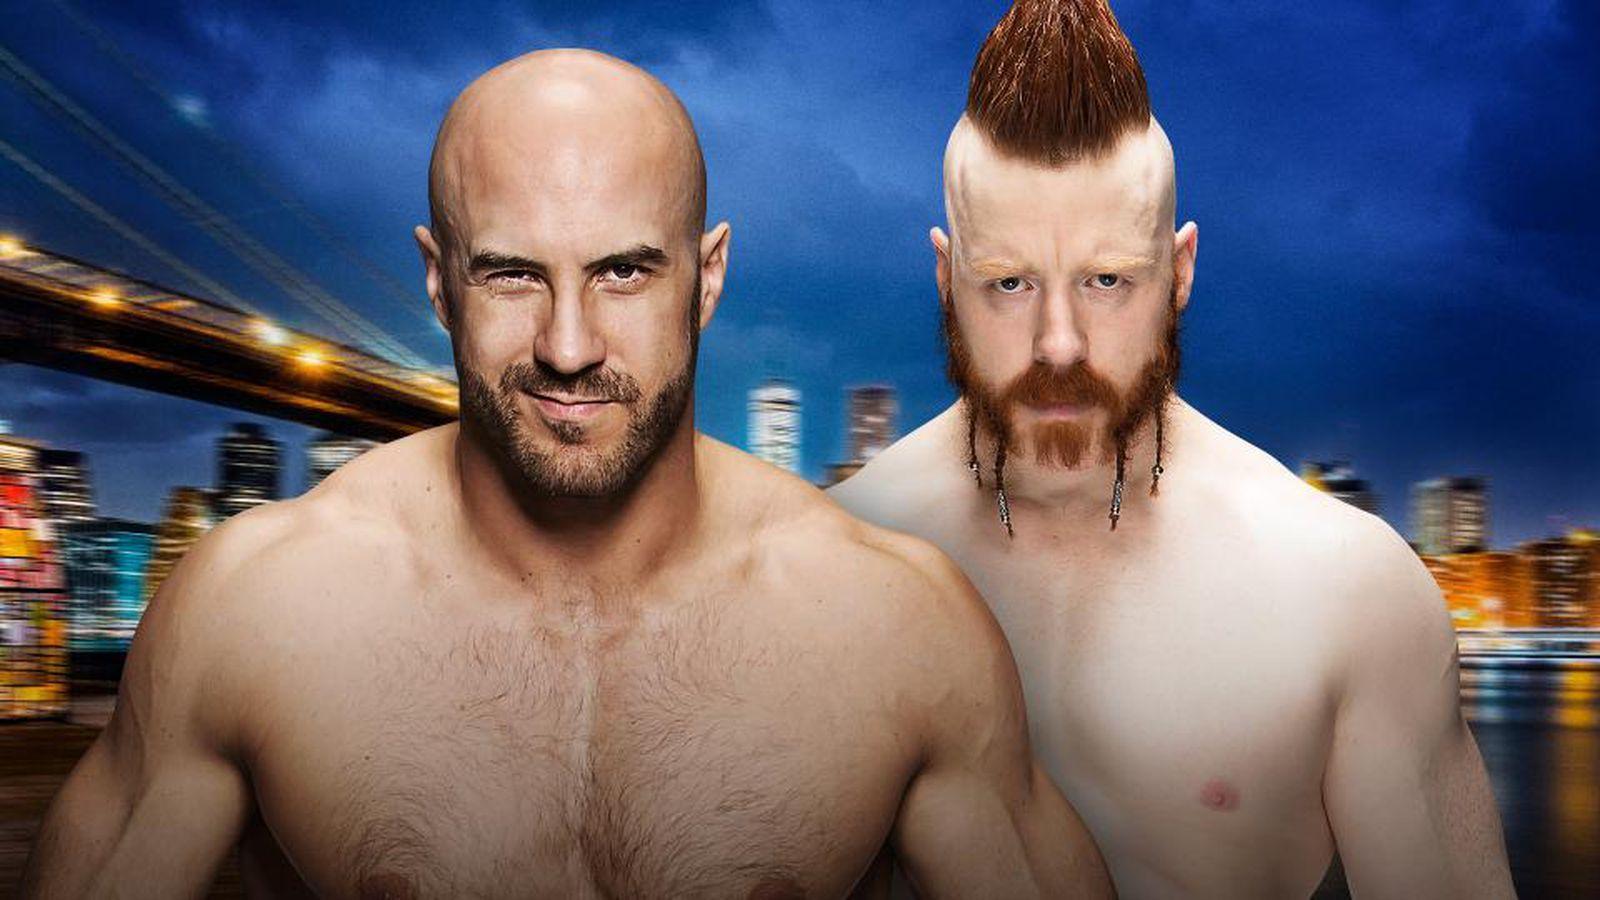 Best Of Seven Series Starts At SummerSlam For Cesaro And Sheamus